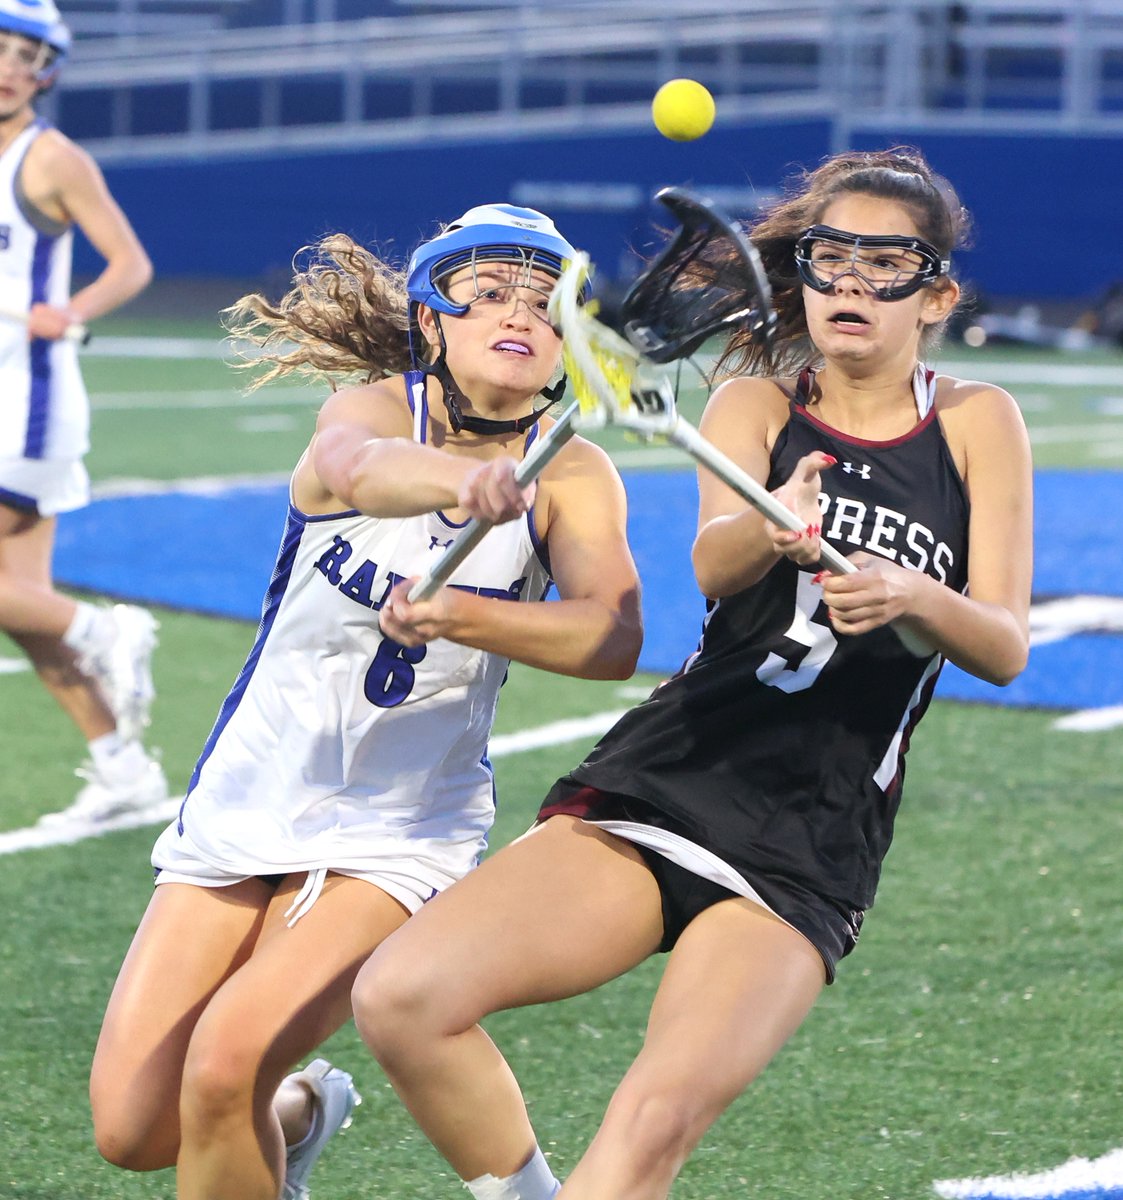 HIGH SCHOOL GIRLS' LACROSSE: KOZEMKO NETS FIVE GOALS AS HORSEHEADS TOPS ELMIRA (24 PHOTOS). . . @HhdsSchools @HorseheadsAD stsportsreport.com/index_get.php?… Photo gallery from the game: brianfees.smugmug.com/ELMIRA-AT-HORS…